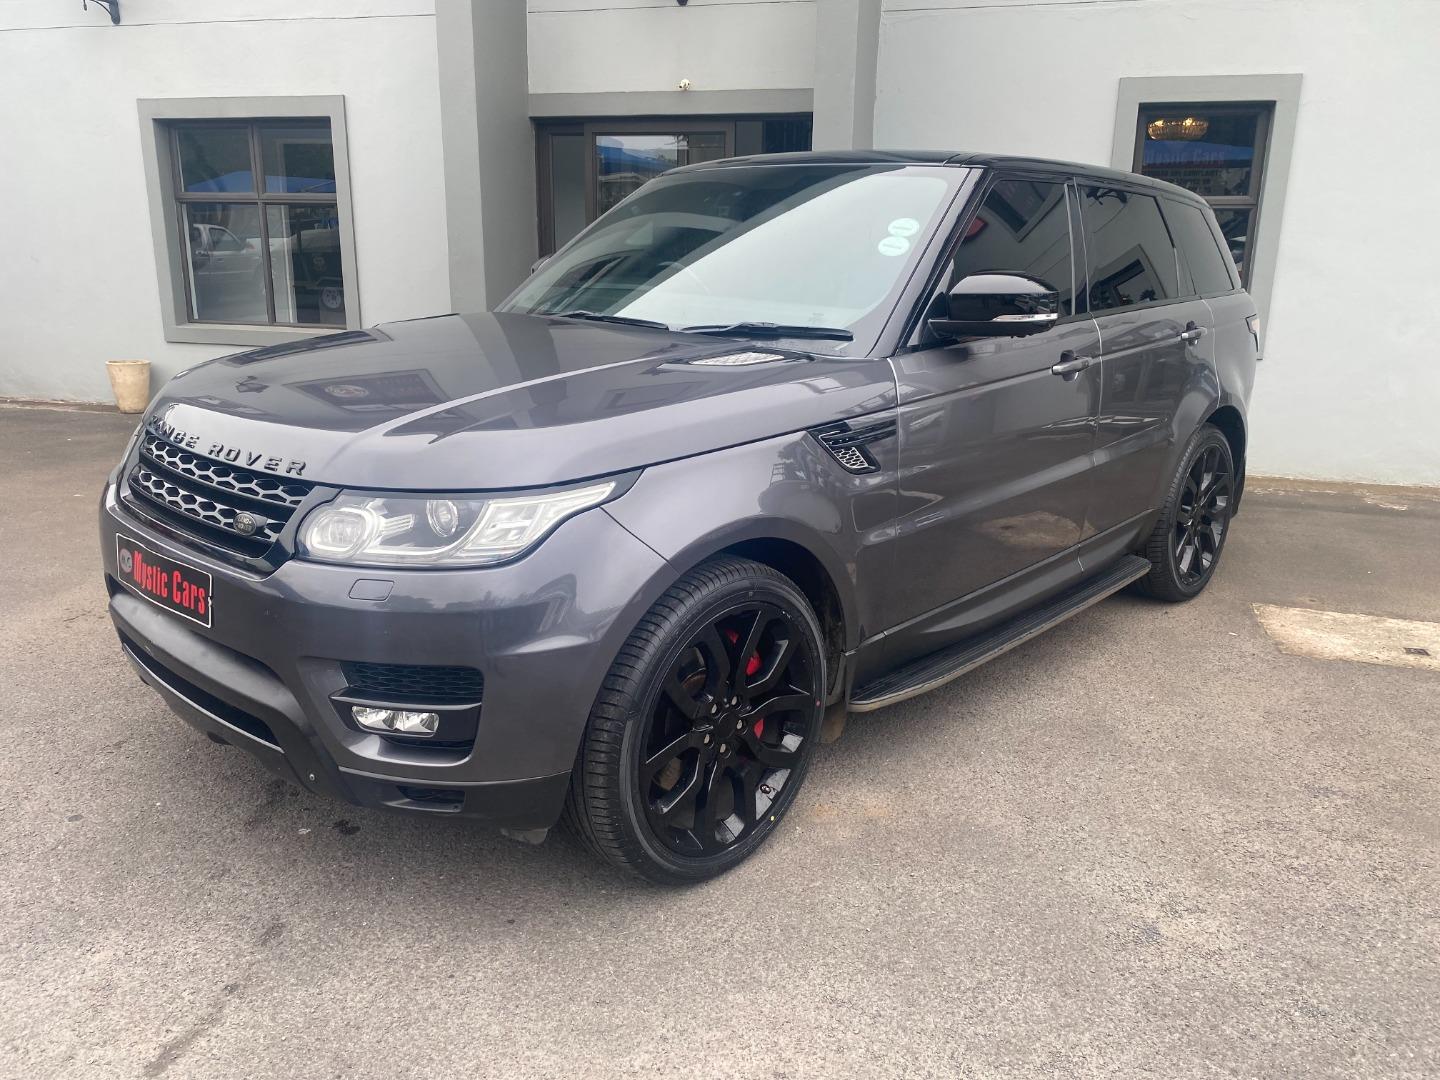 2015 LAND ROVER RANGE ROVER SPORT Hse dynamic supercharged